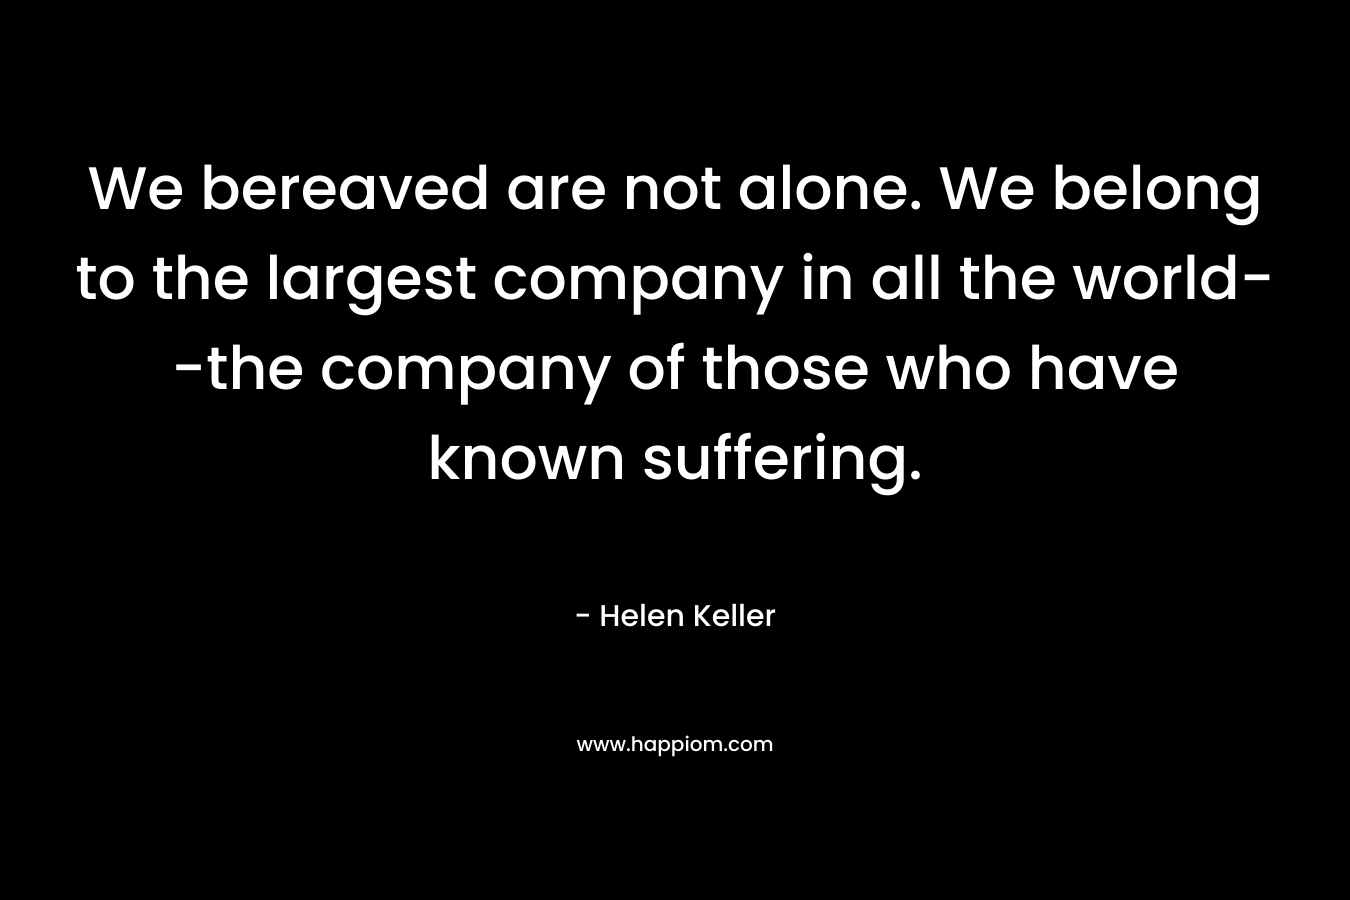 We bereaved are not alone. We belong to the largest company in all the world--the company of those who have known suffering.